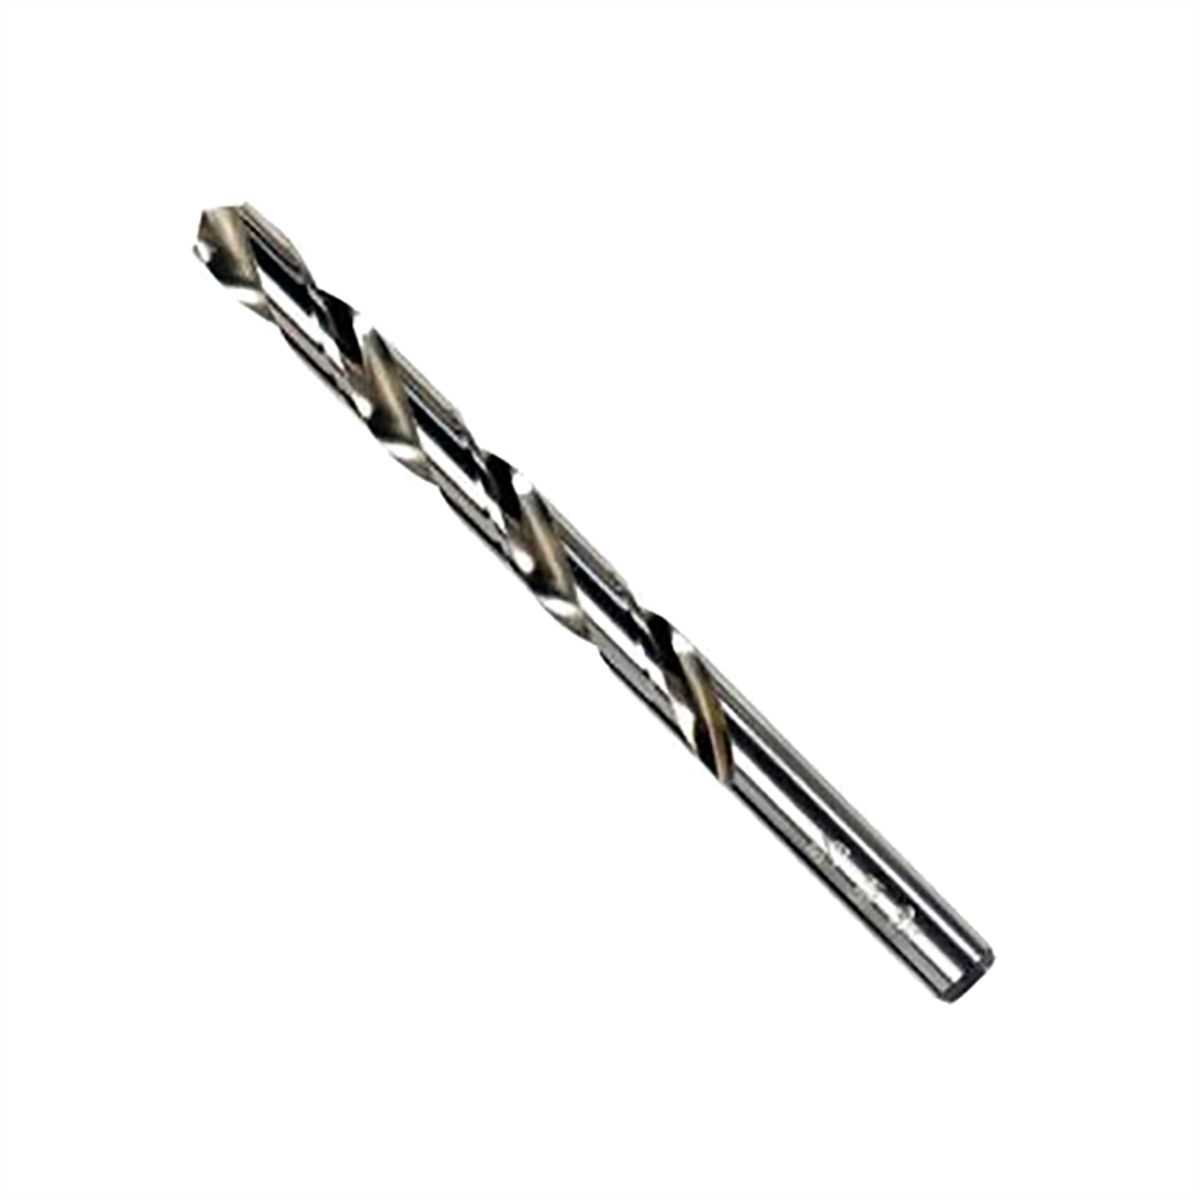 How to Choose the Right HSS Drill Bit